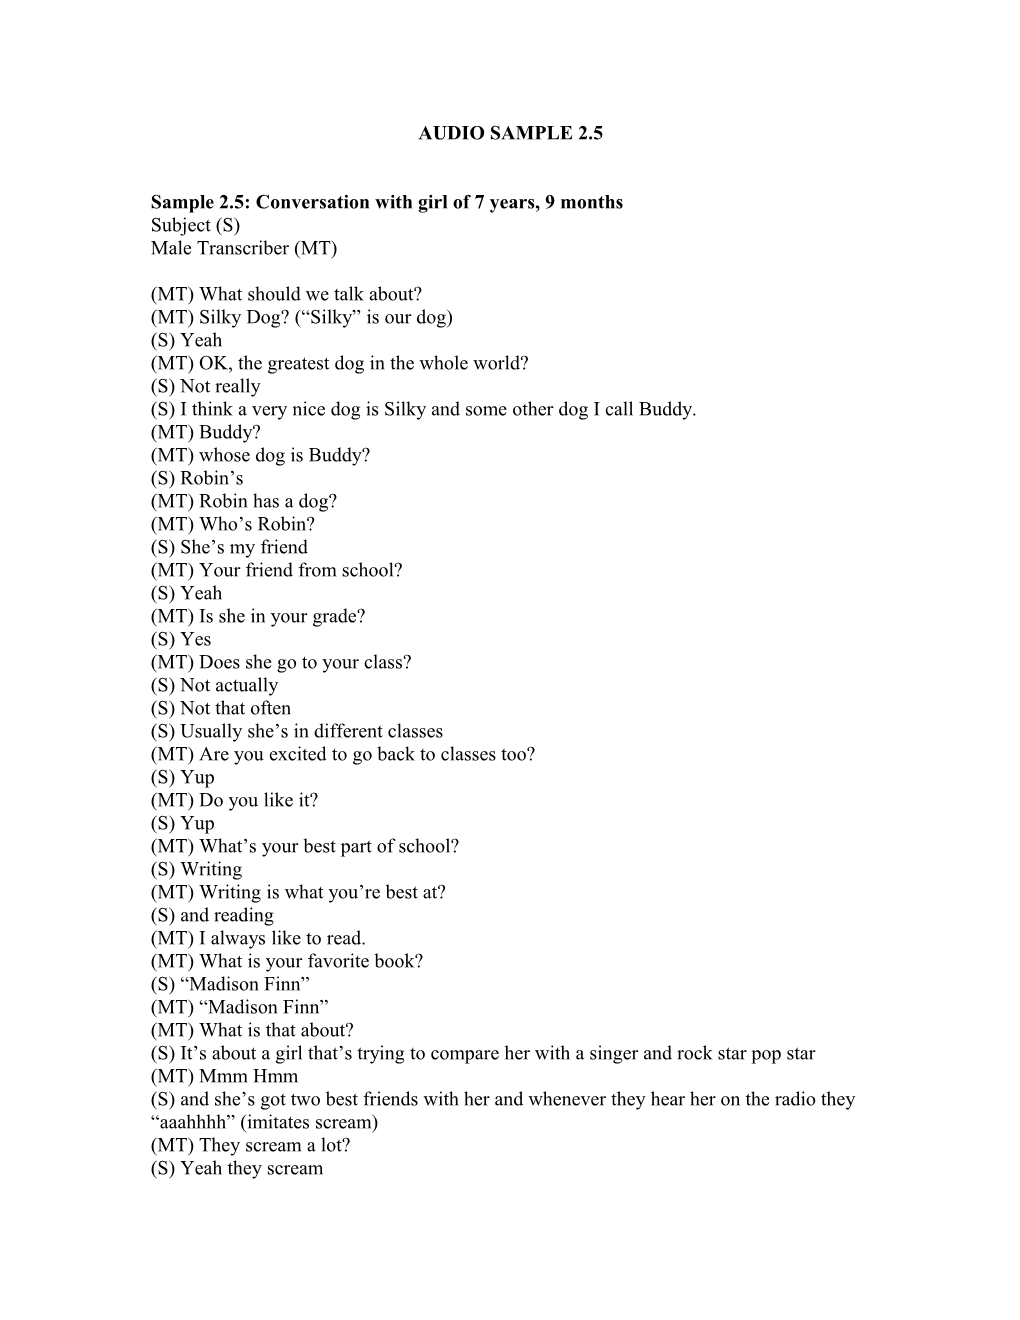 Sample 2.5: Conversation with Girl of 7 Years, 9 Months